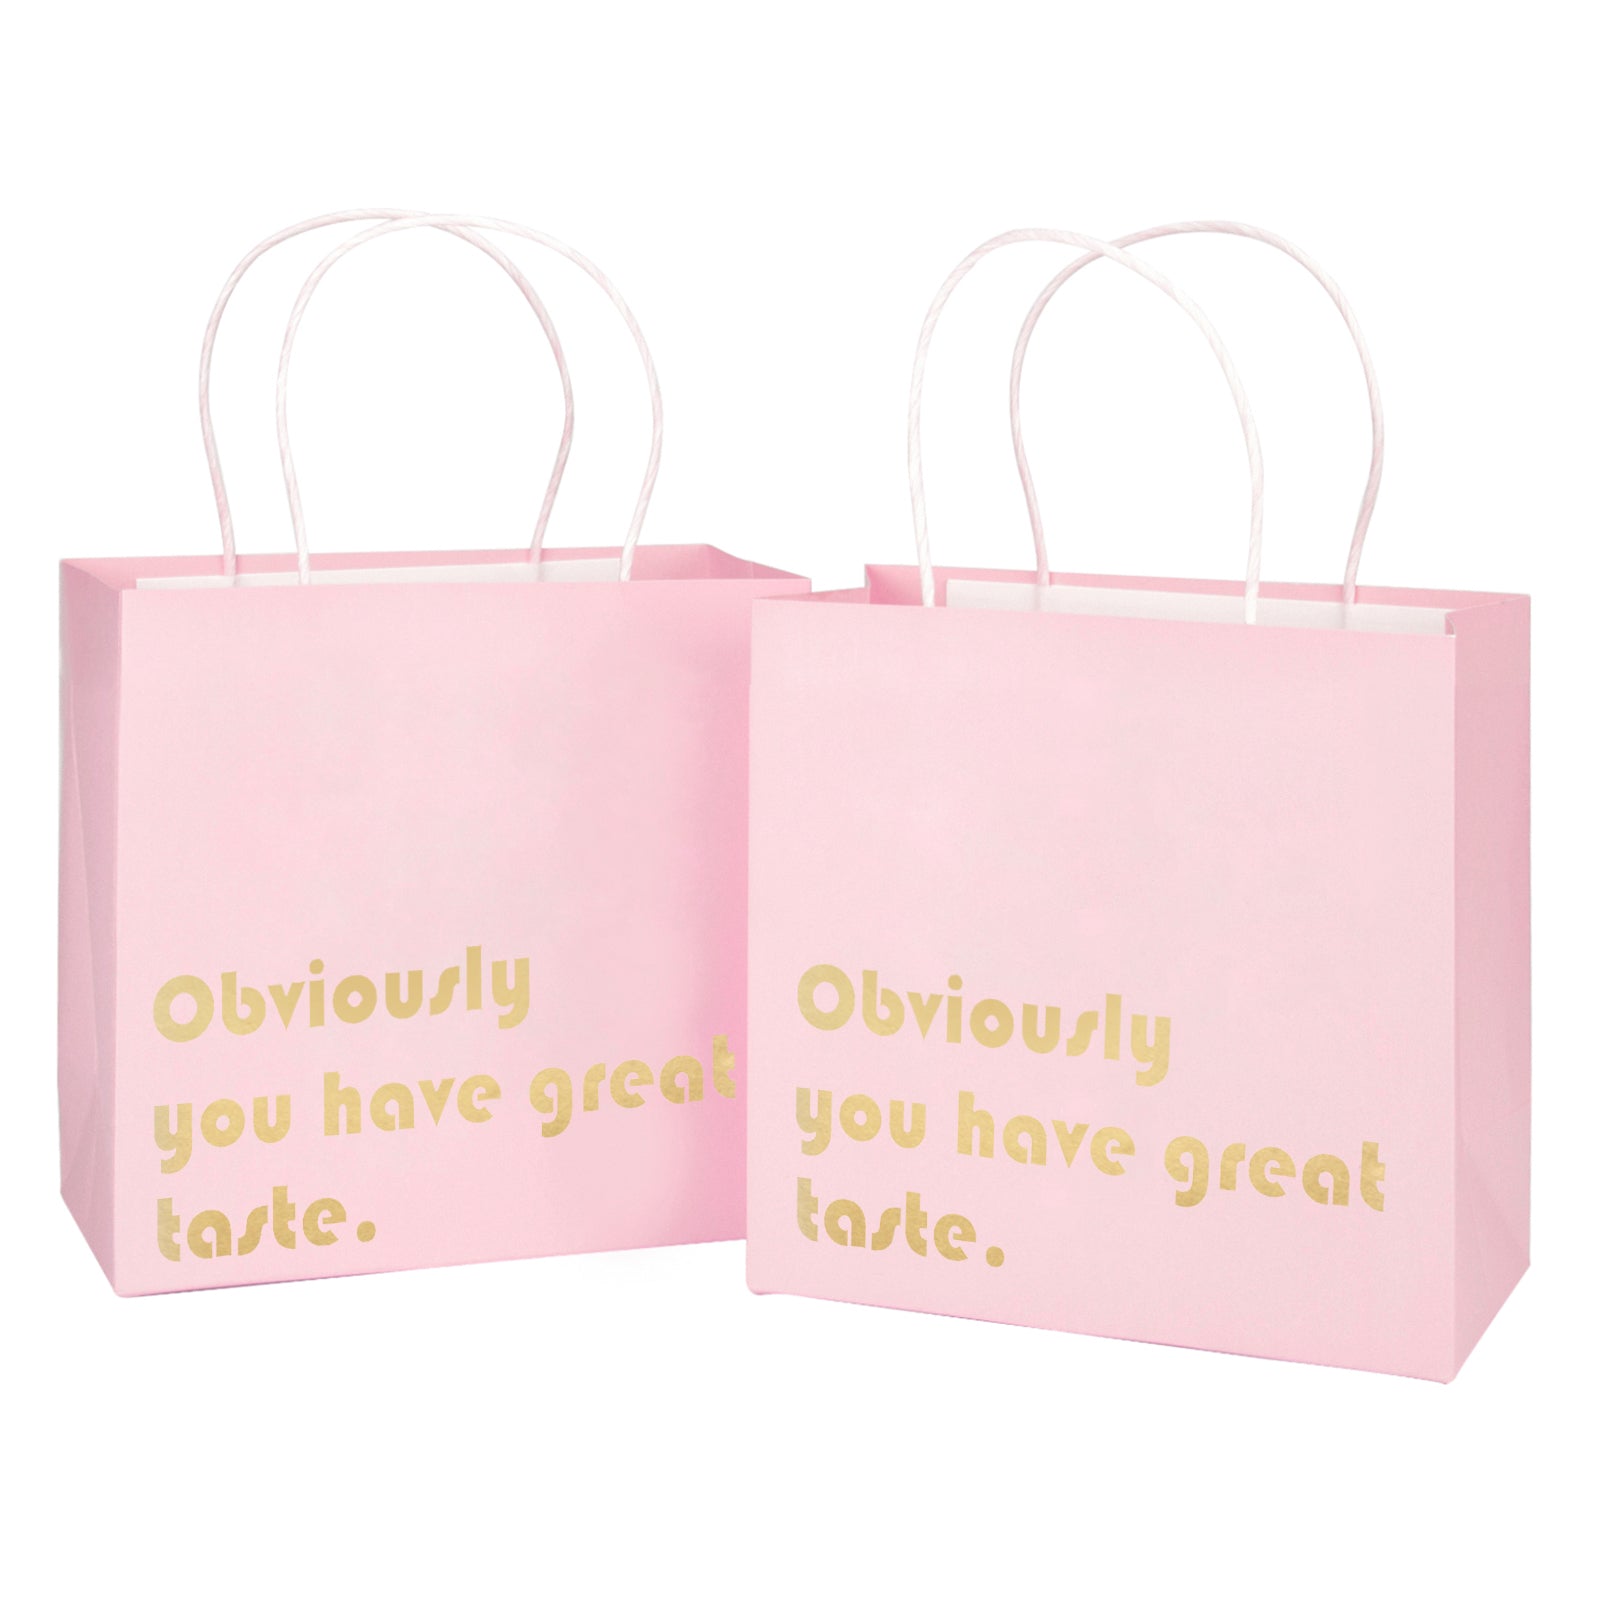 Obviously You Have Great Taste Gift Bag 12 Pack 10"x5"x10"-Pink Gold